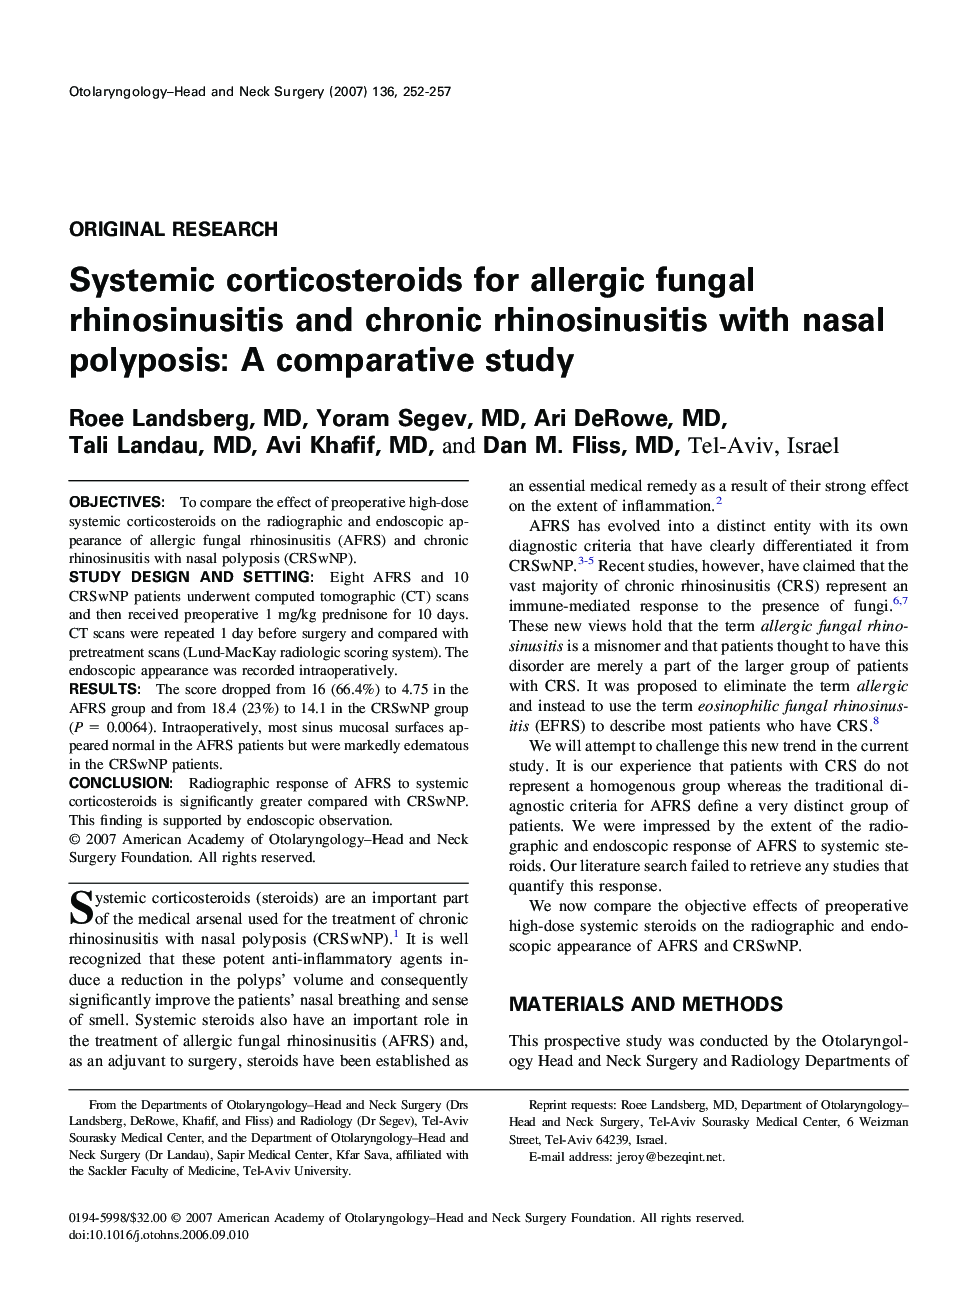 Systemic corticosteroids for allergic fungal rhinosinusitis and chronic rhinosinusitis with nasal polyposis: A comparative study